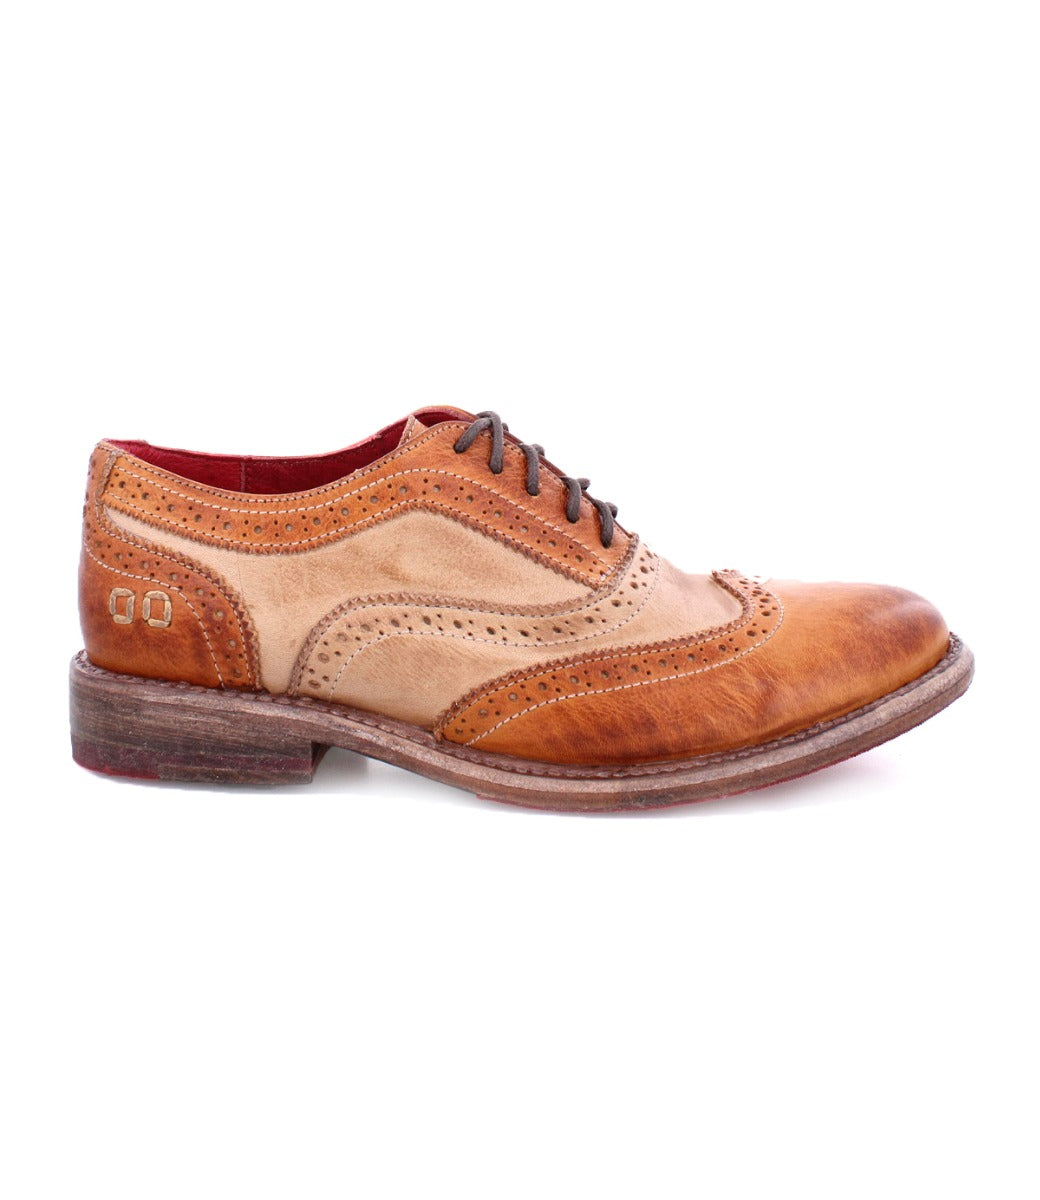 A tan and brown wingtip oxford shoe called "Lita" by Bed Stu.